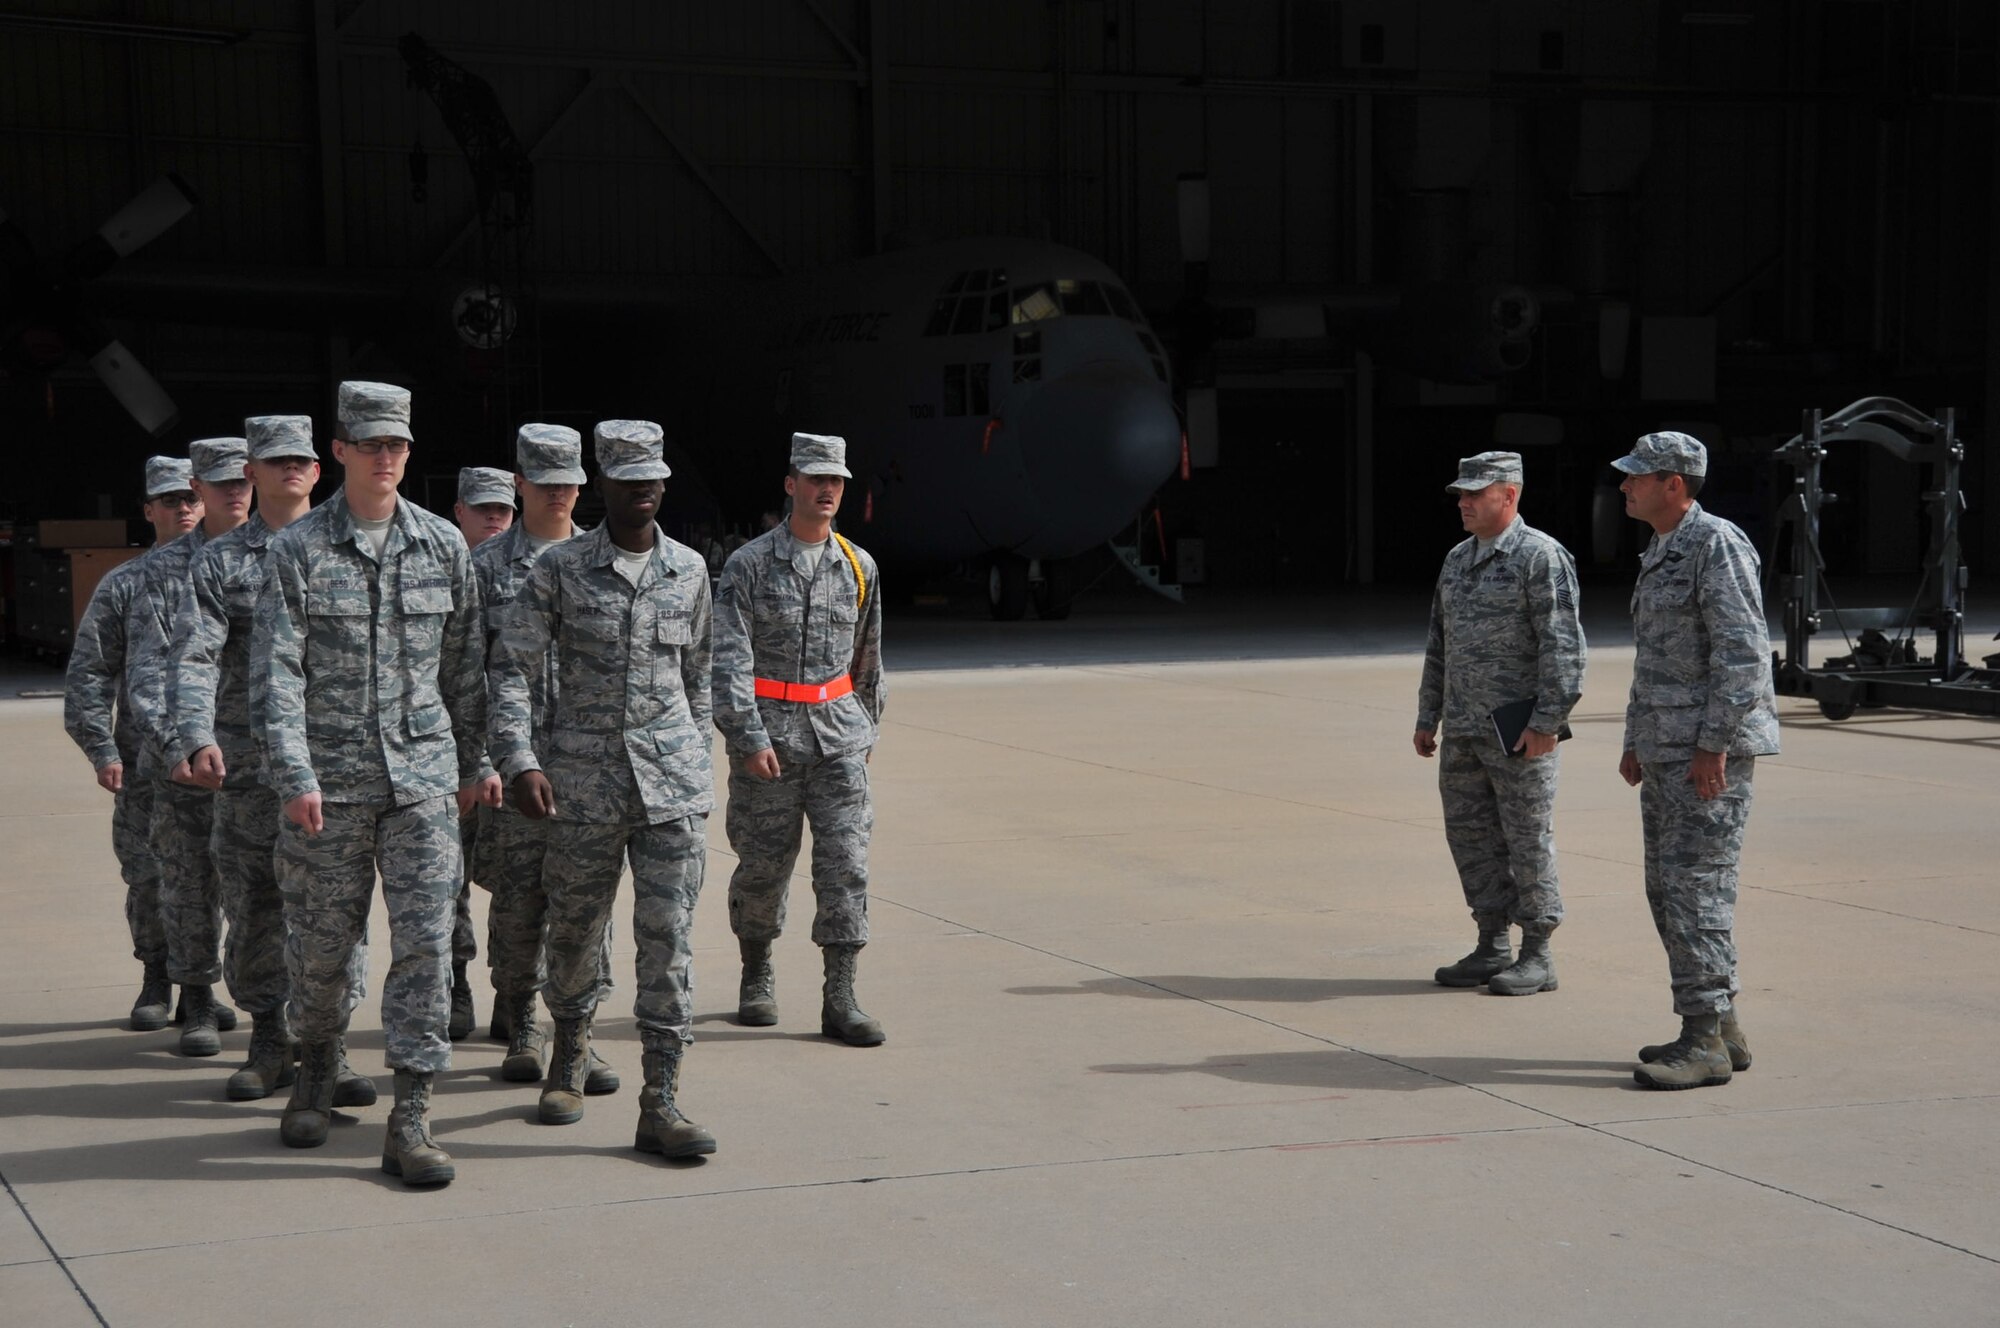 The commander of the 82nd Training Wing, Brig. Gen. Scott Kindsvater and 82nd TRW Command Chief, Chief Master Sgt. Charles Burgess III, both spent multiple days experiencing a ‘Day in the Life’ of an Airman-in-Training at Sheppard Air Force Base, Texas, Aug. 19, 2014. (U.S. Air Force photo/Airman 1st Class Robert L. McIlrath)